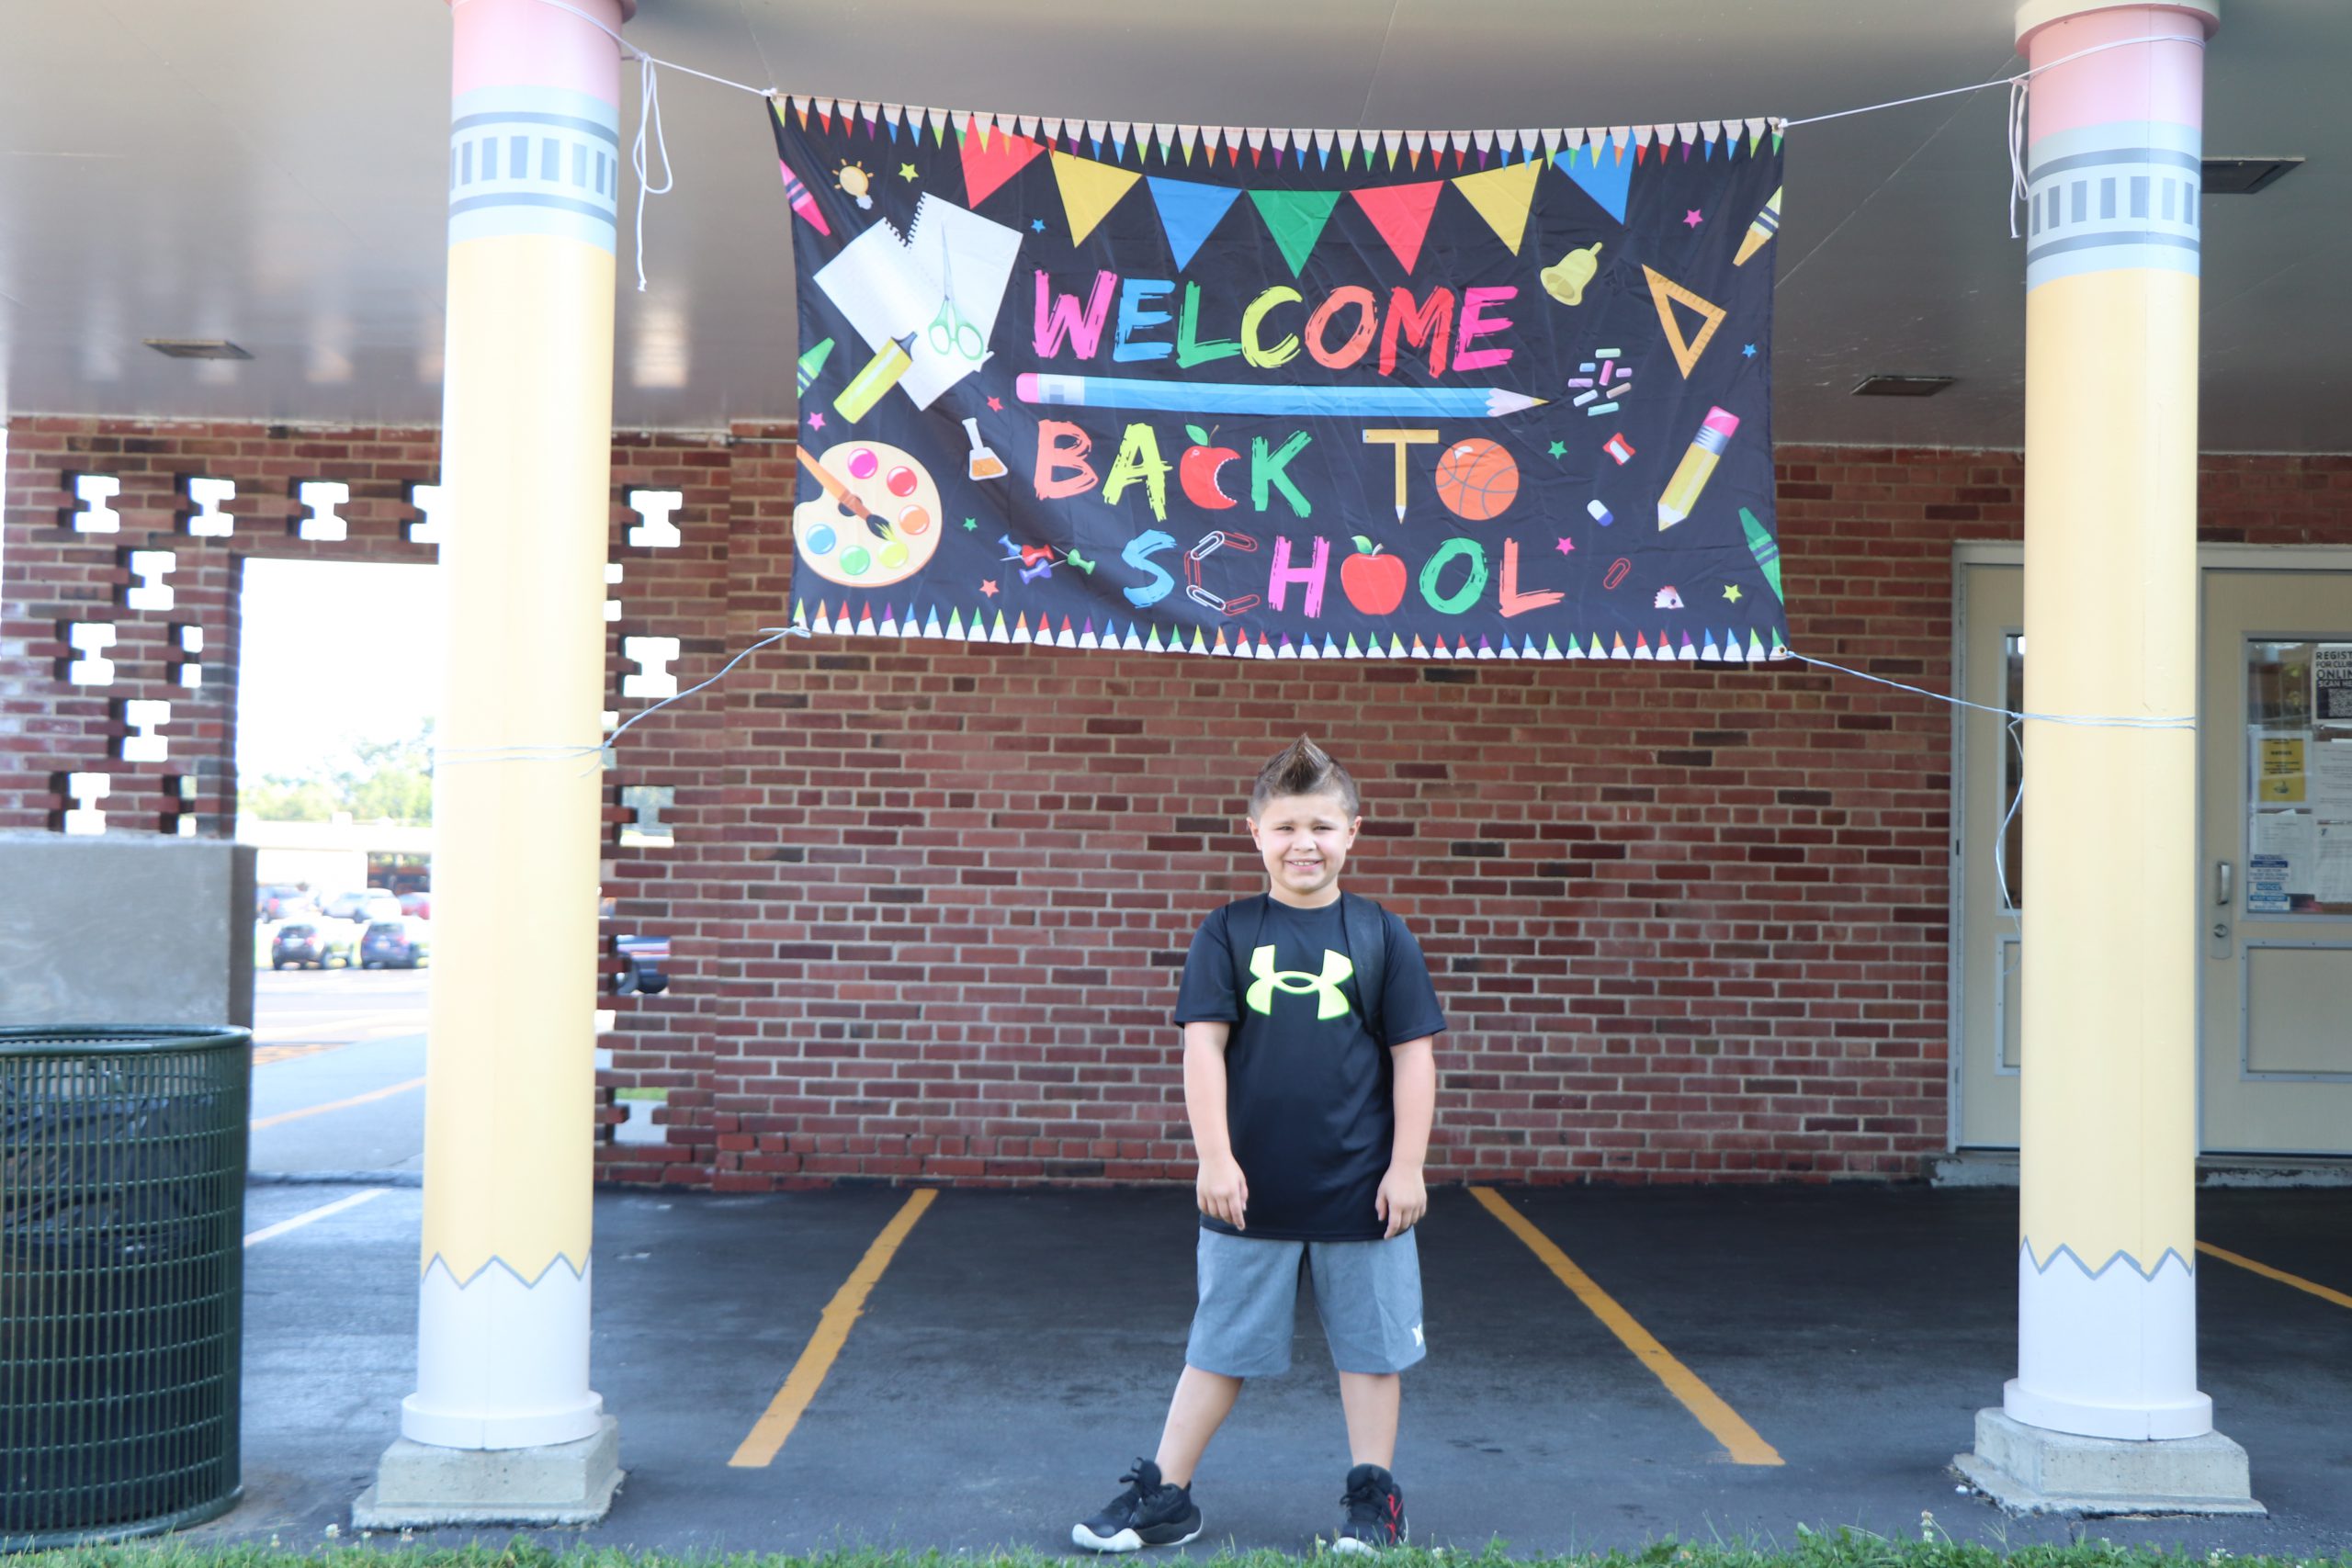 A boy smiles under a "Welcome Back to School" banner held between two pillars shaped like pencils.